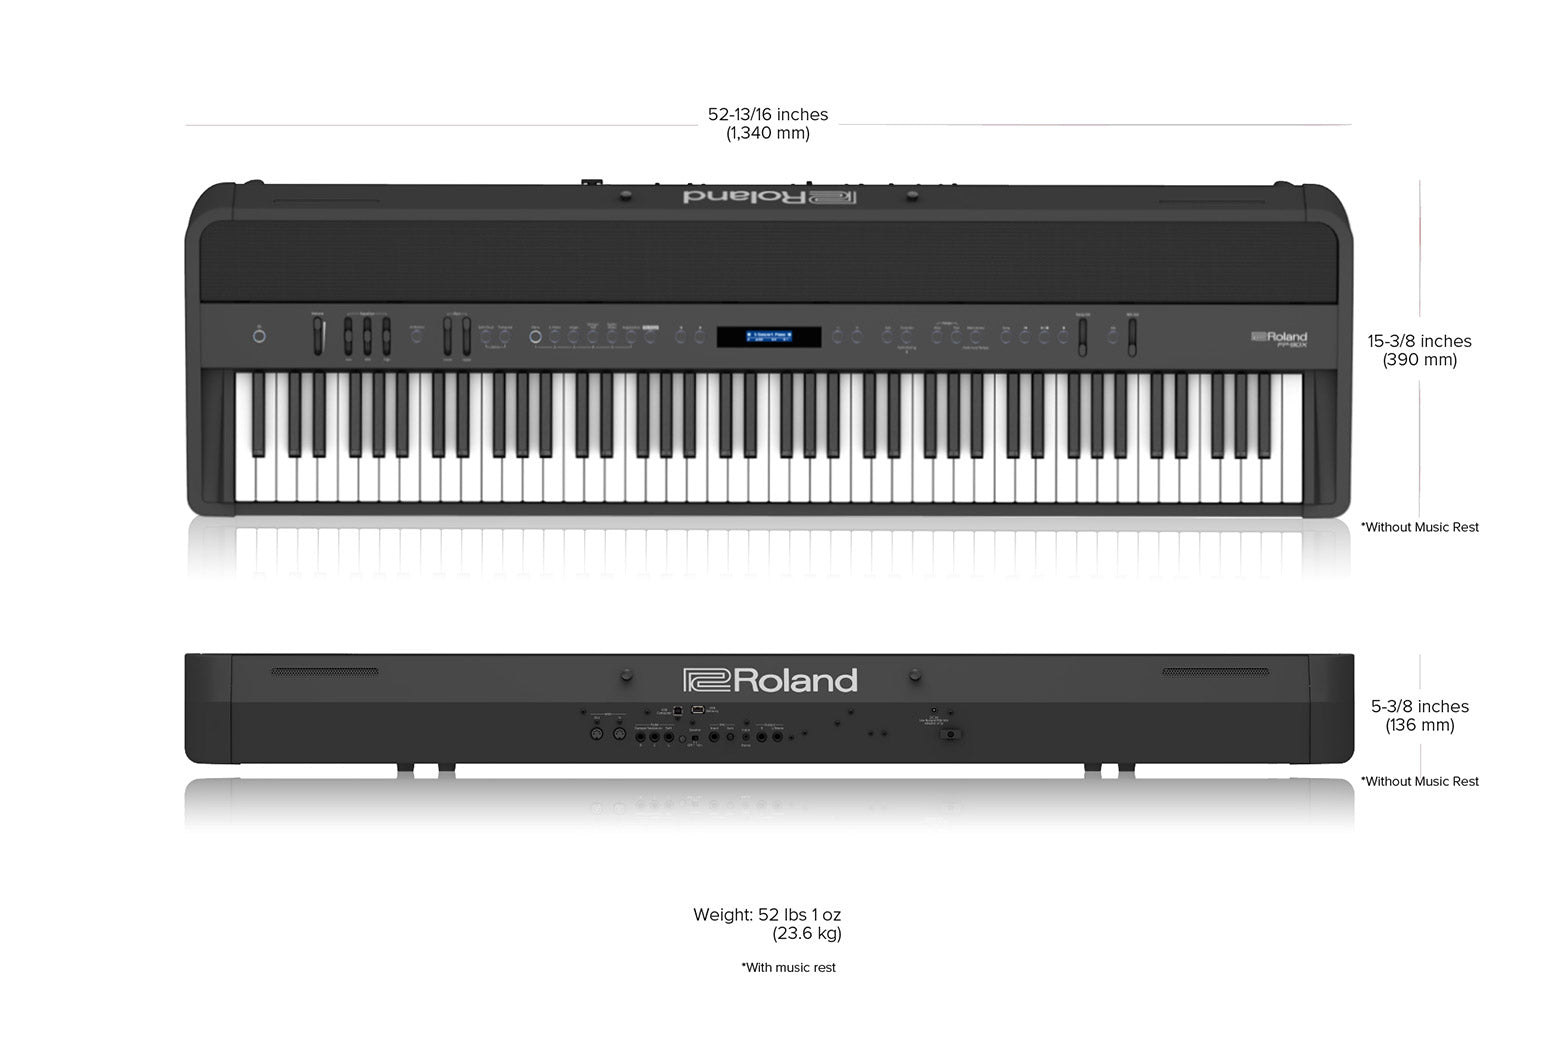 Roland FP-90X 88-key Digital Piano Musician Package with RH-5 Headphone and DP-10 Pedal - Black (FP90X / FP 90X), ROLAND, DIGITAL PIANO, roland-digital-piano-fp-90x-bk, ZOSO MUSIC SDN BHD